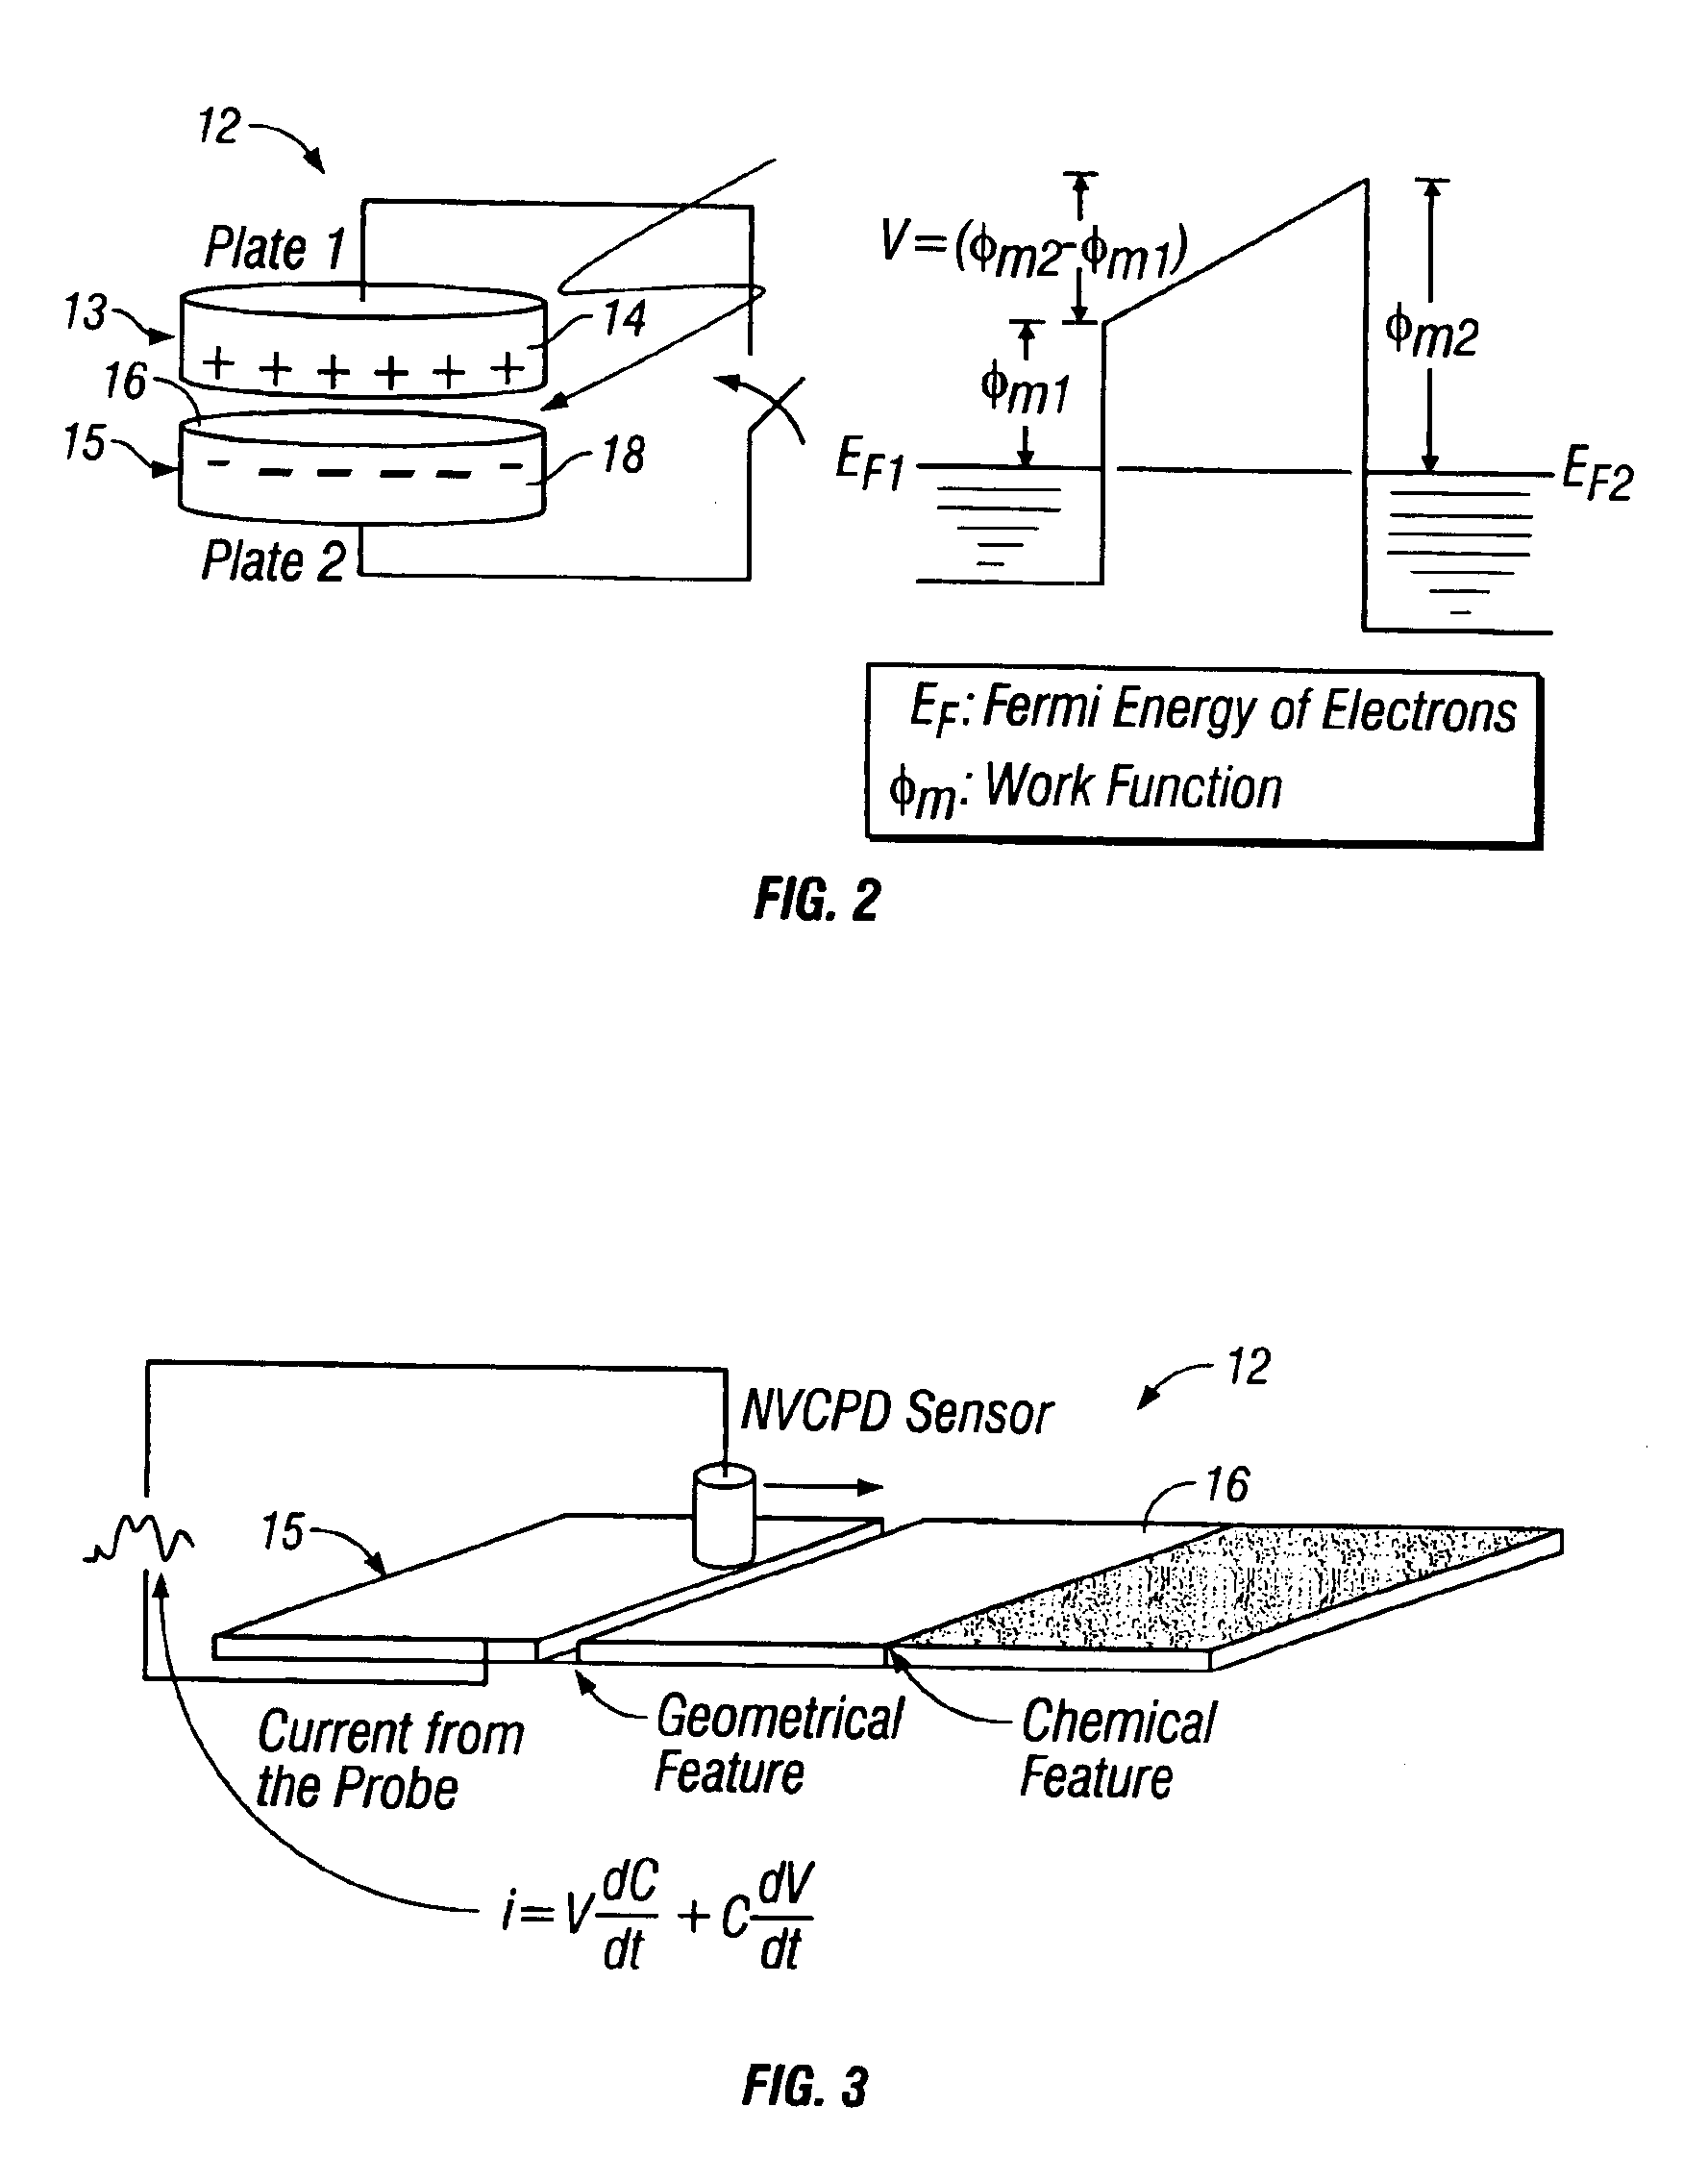 Semiconductor wafer inspection system